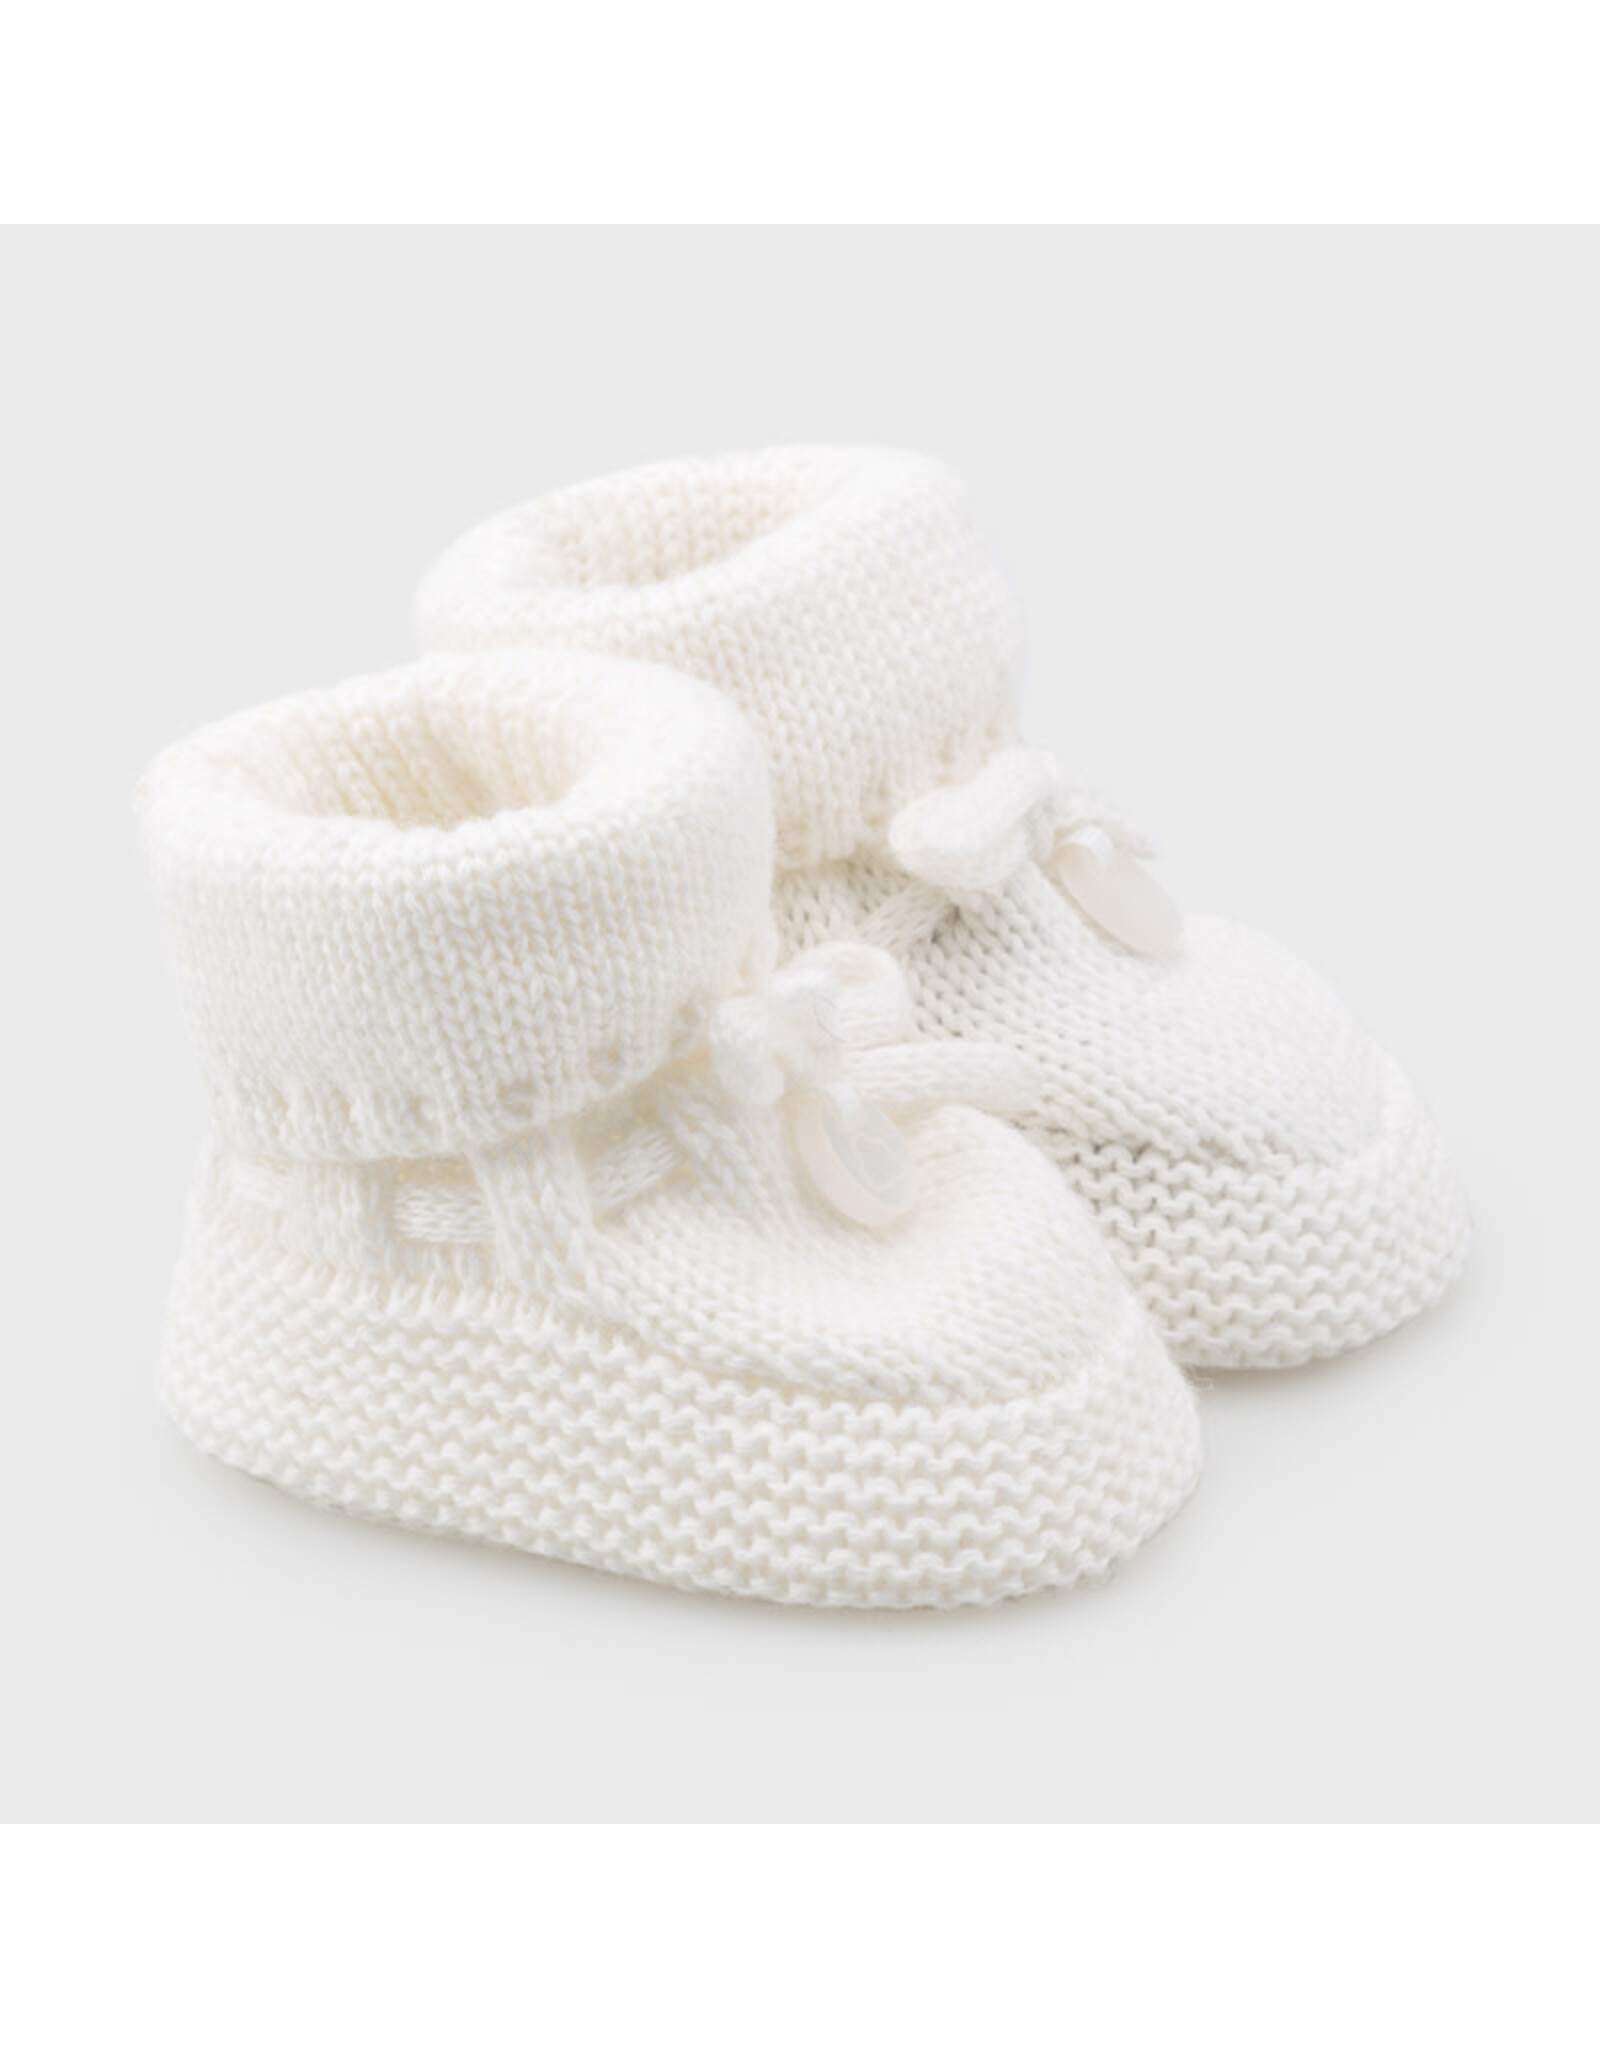 Mayoral Natural Knit Booties